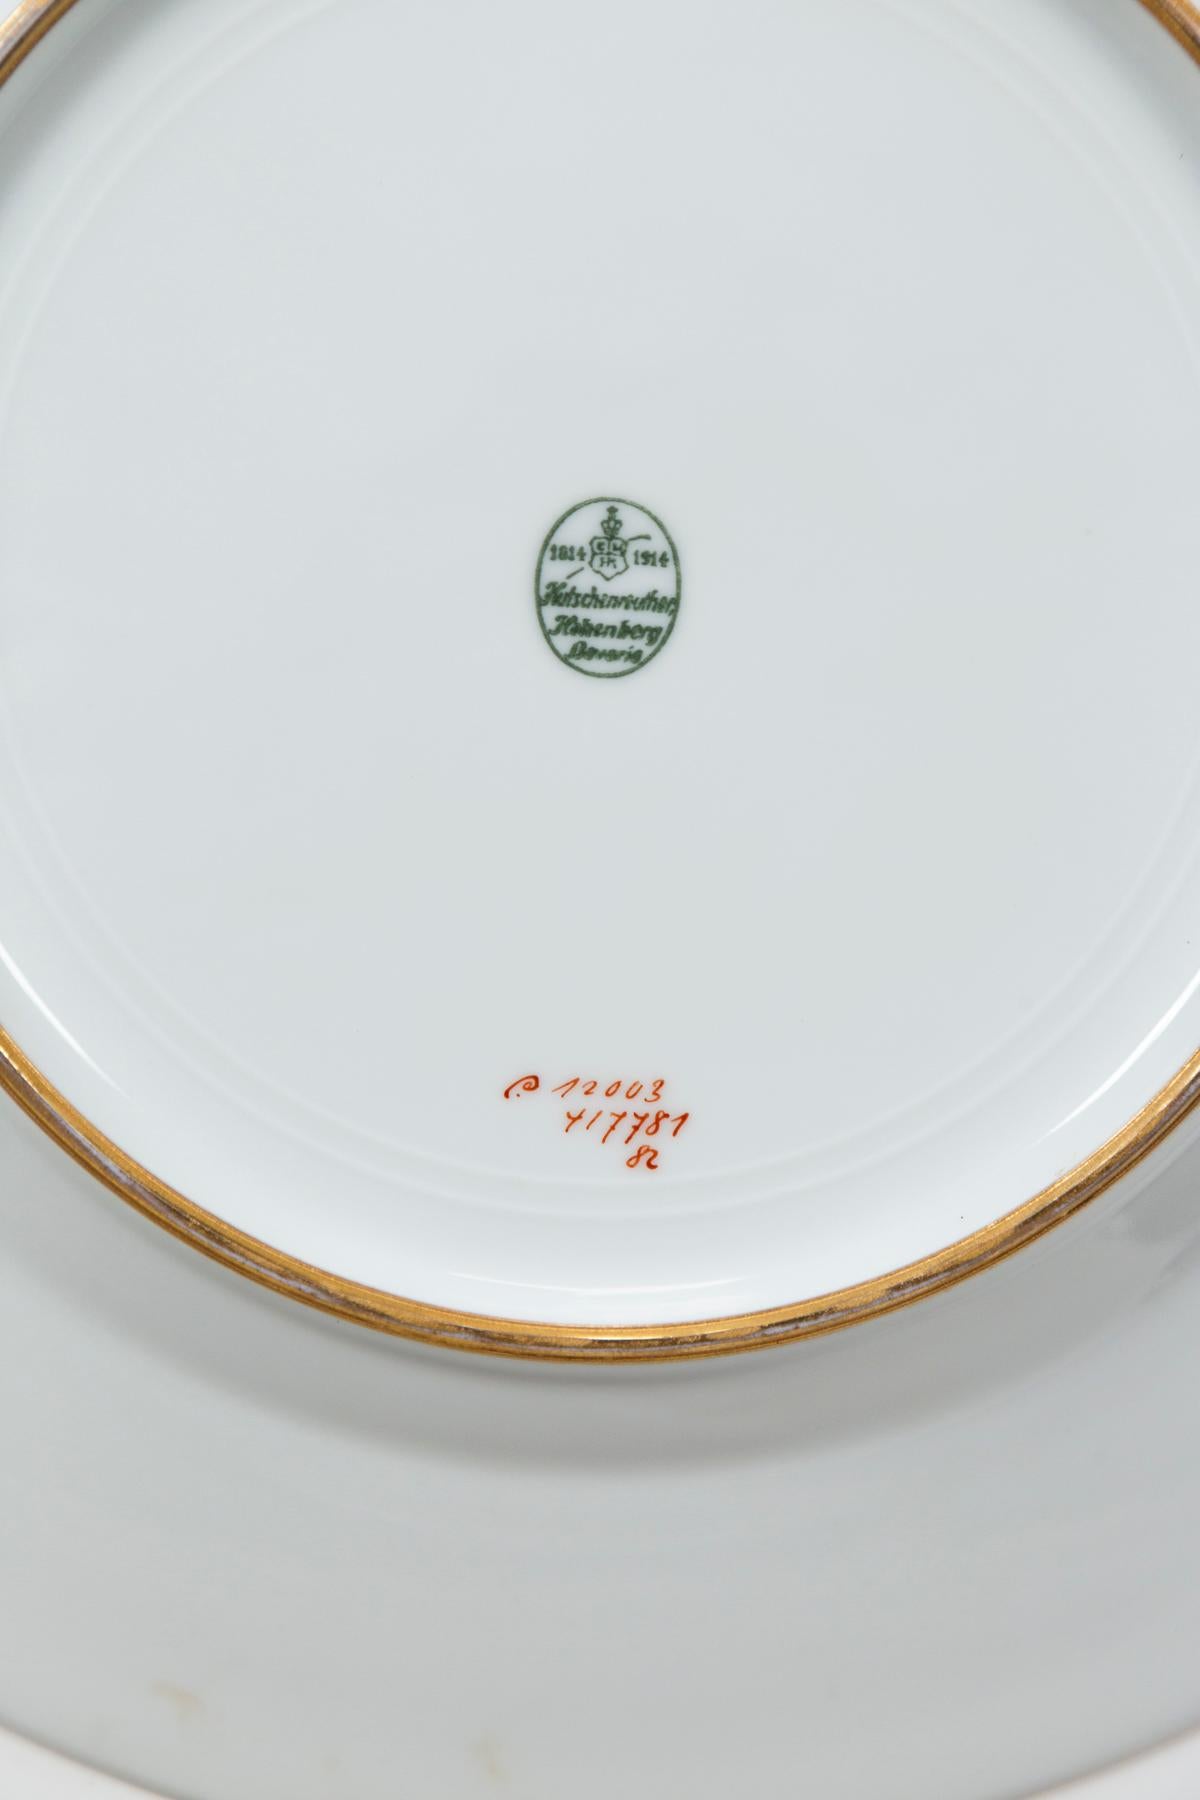 German Antique Hutschenreuther Dinner Plates, Early 20th Century, Bavaria For Sale